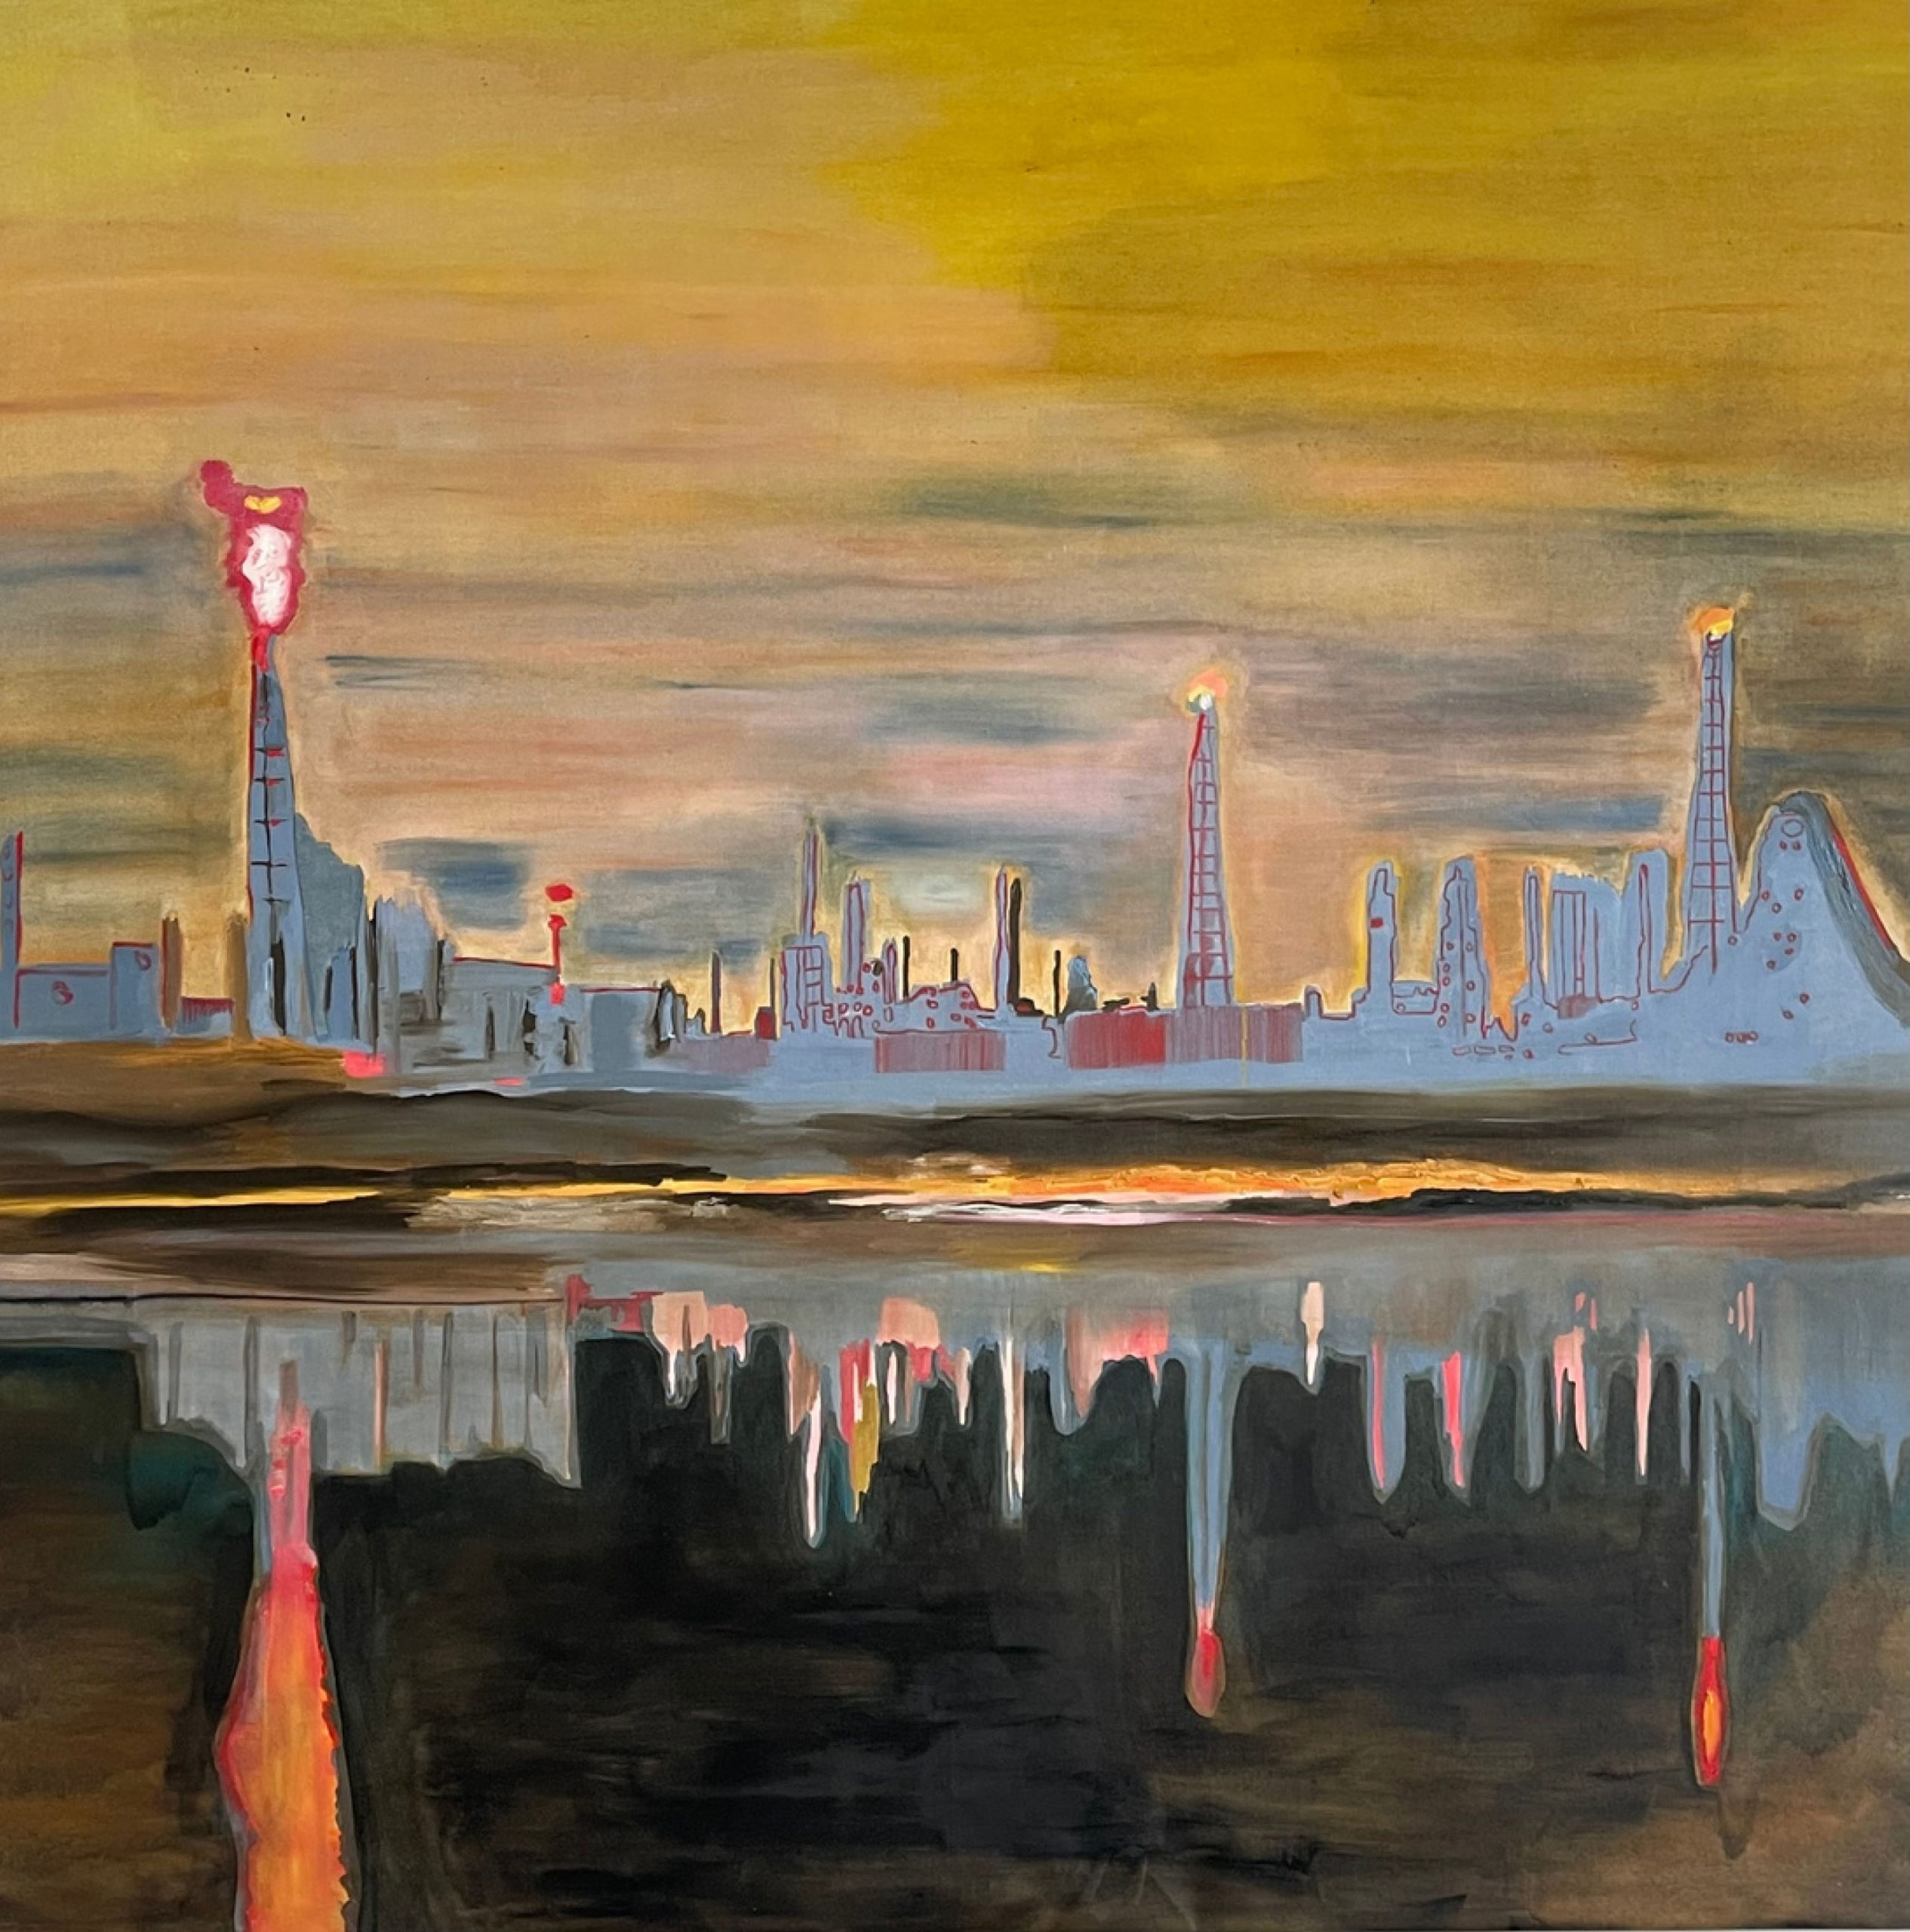 Refinery, 2022 - Oil on canvas 77.5 x 77.2 in (196.8 x 196 cm)